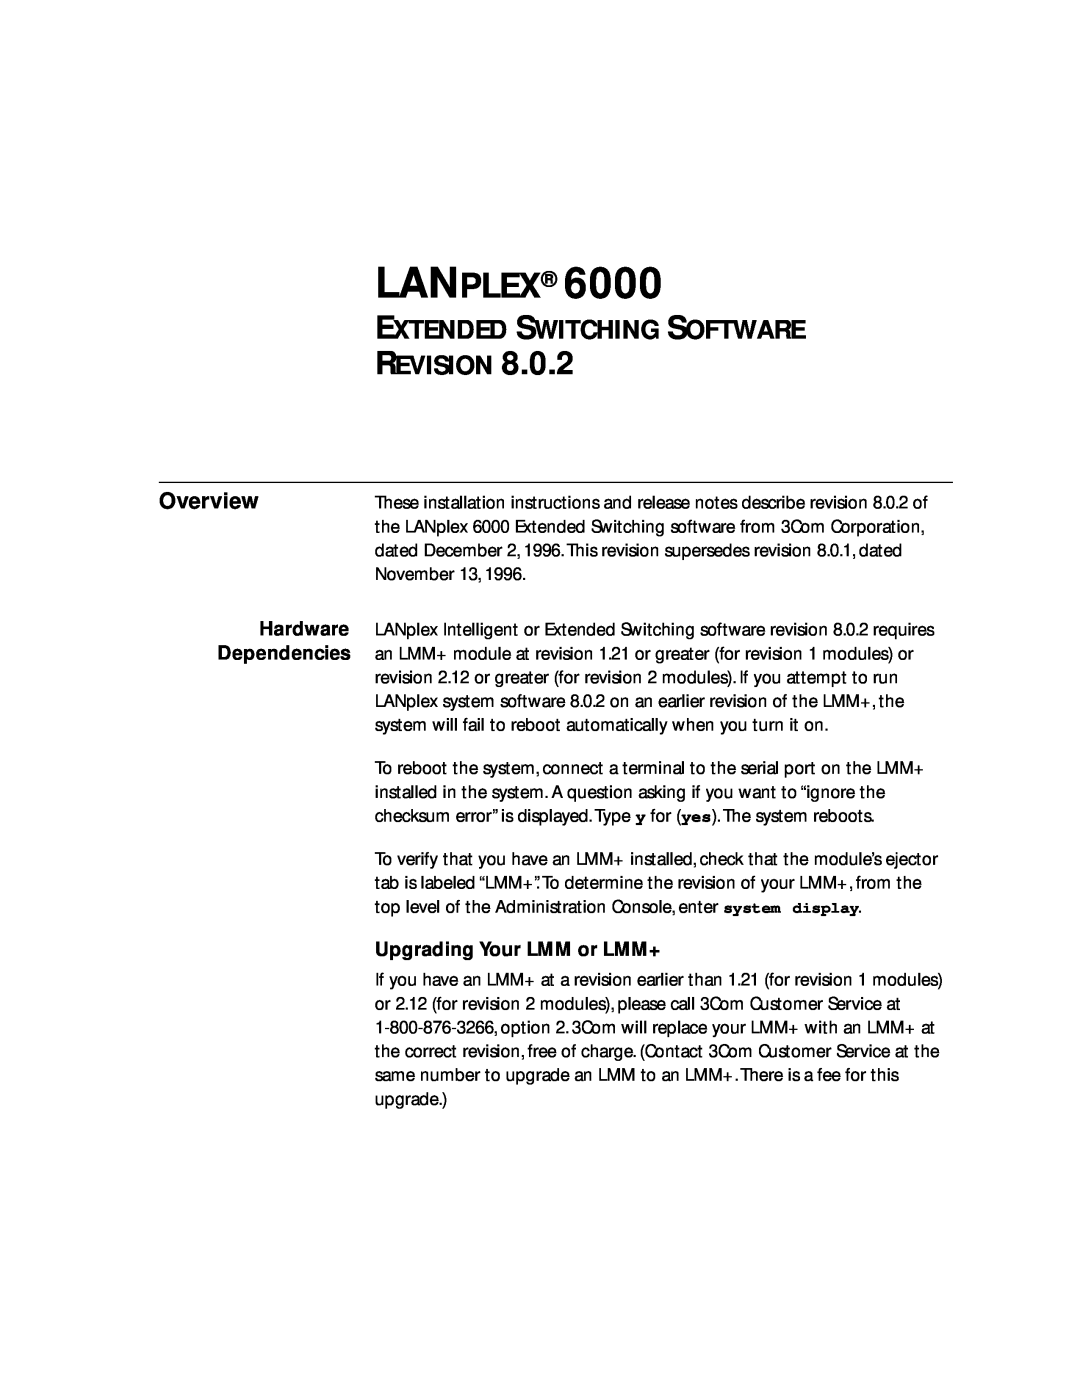 3Com 6000 manual Overview, Lanplex, Extended Switching Software Revision 